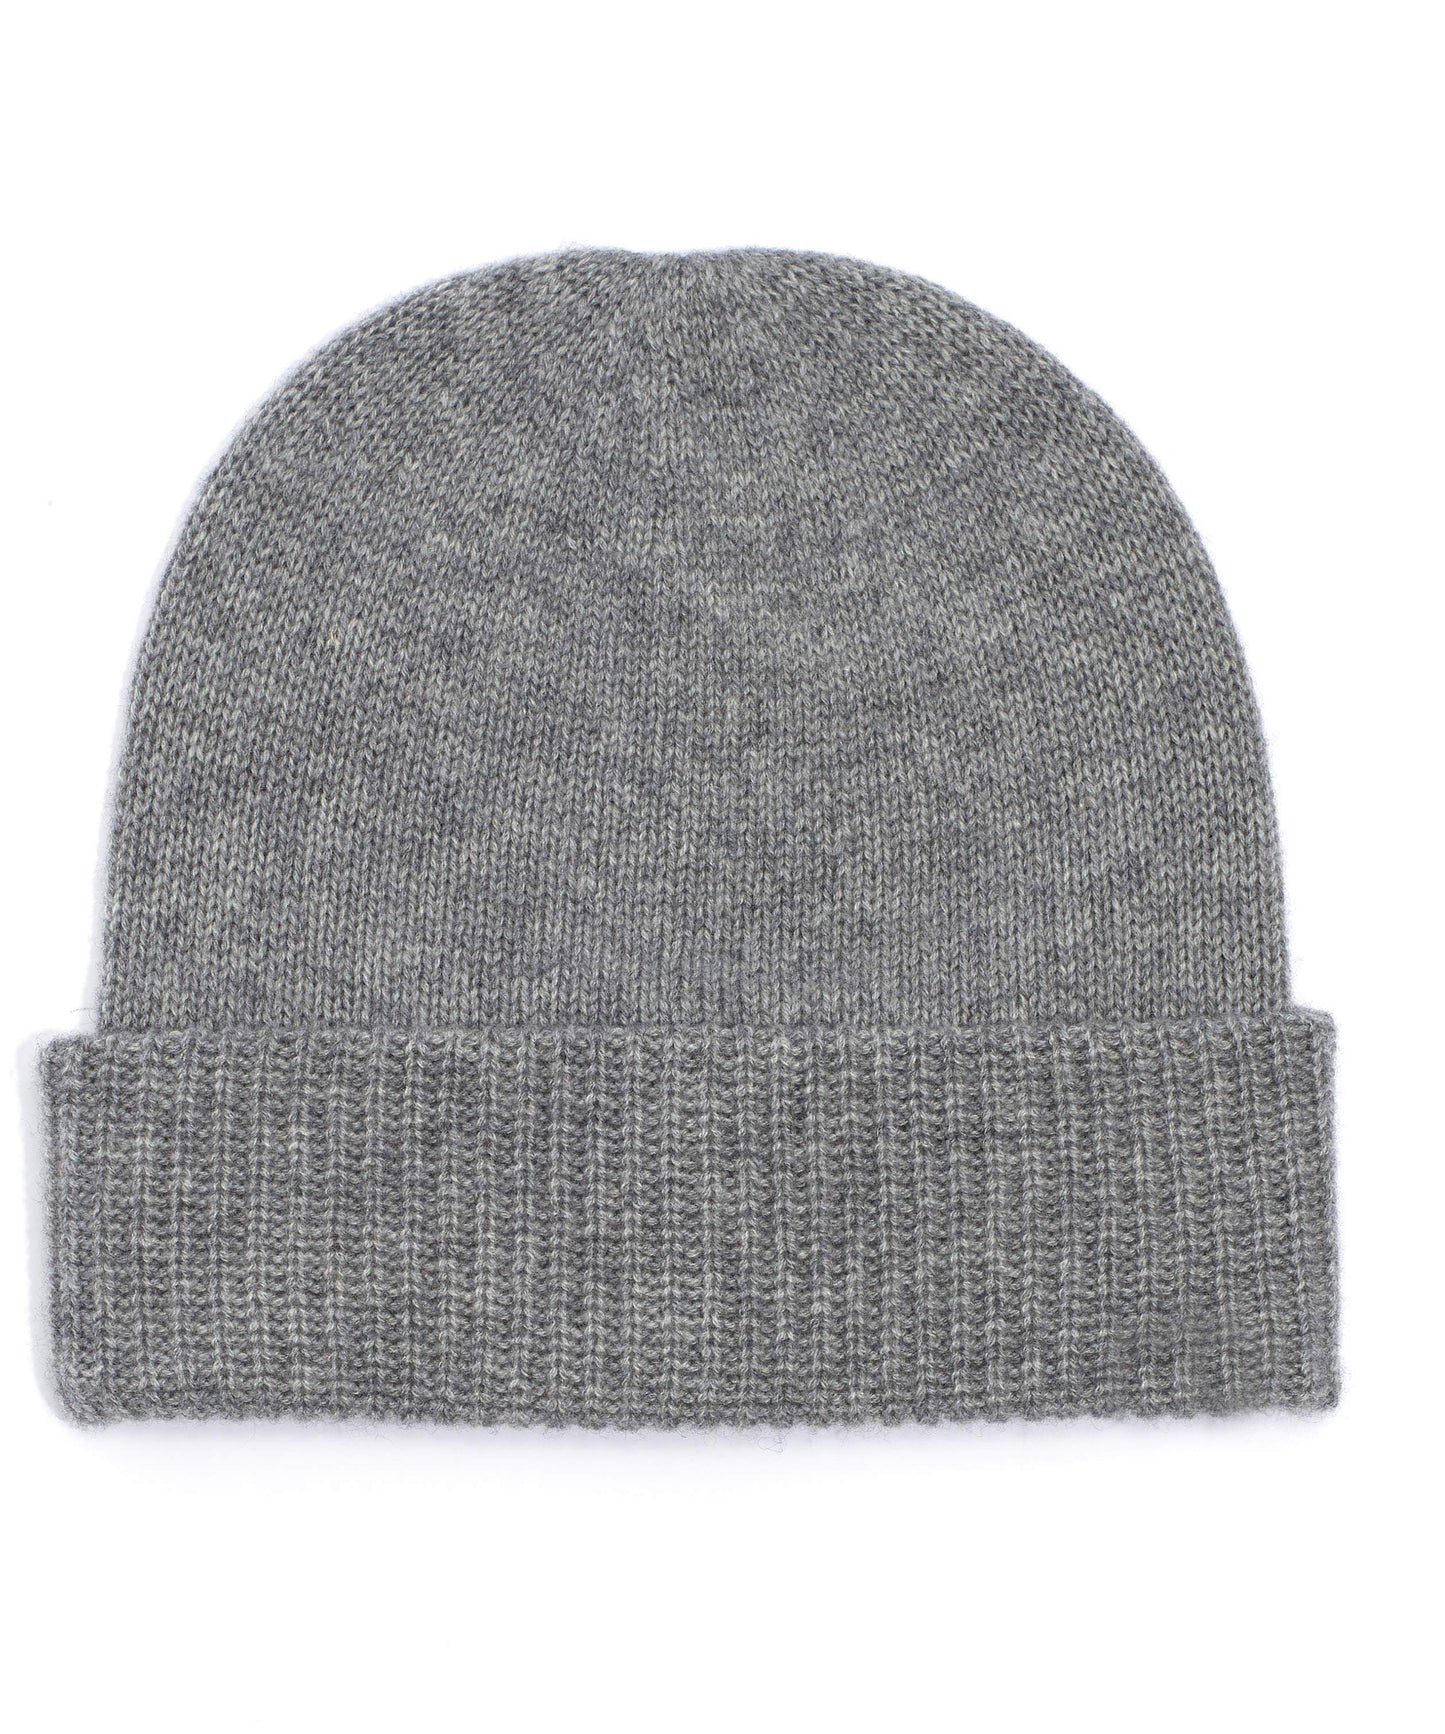 Wool/Cashmere Lofty Beanie in color Grey Heather